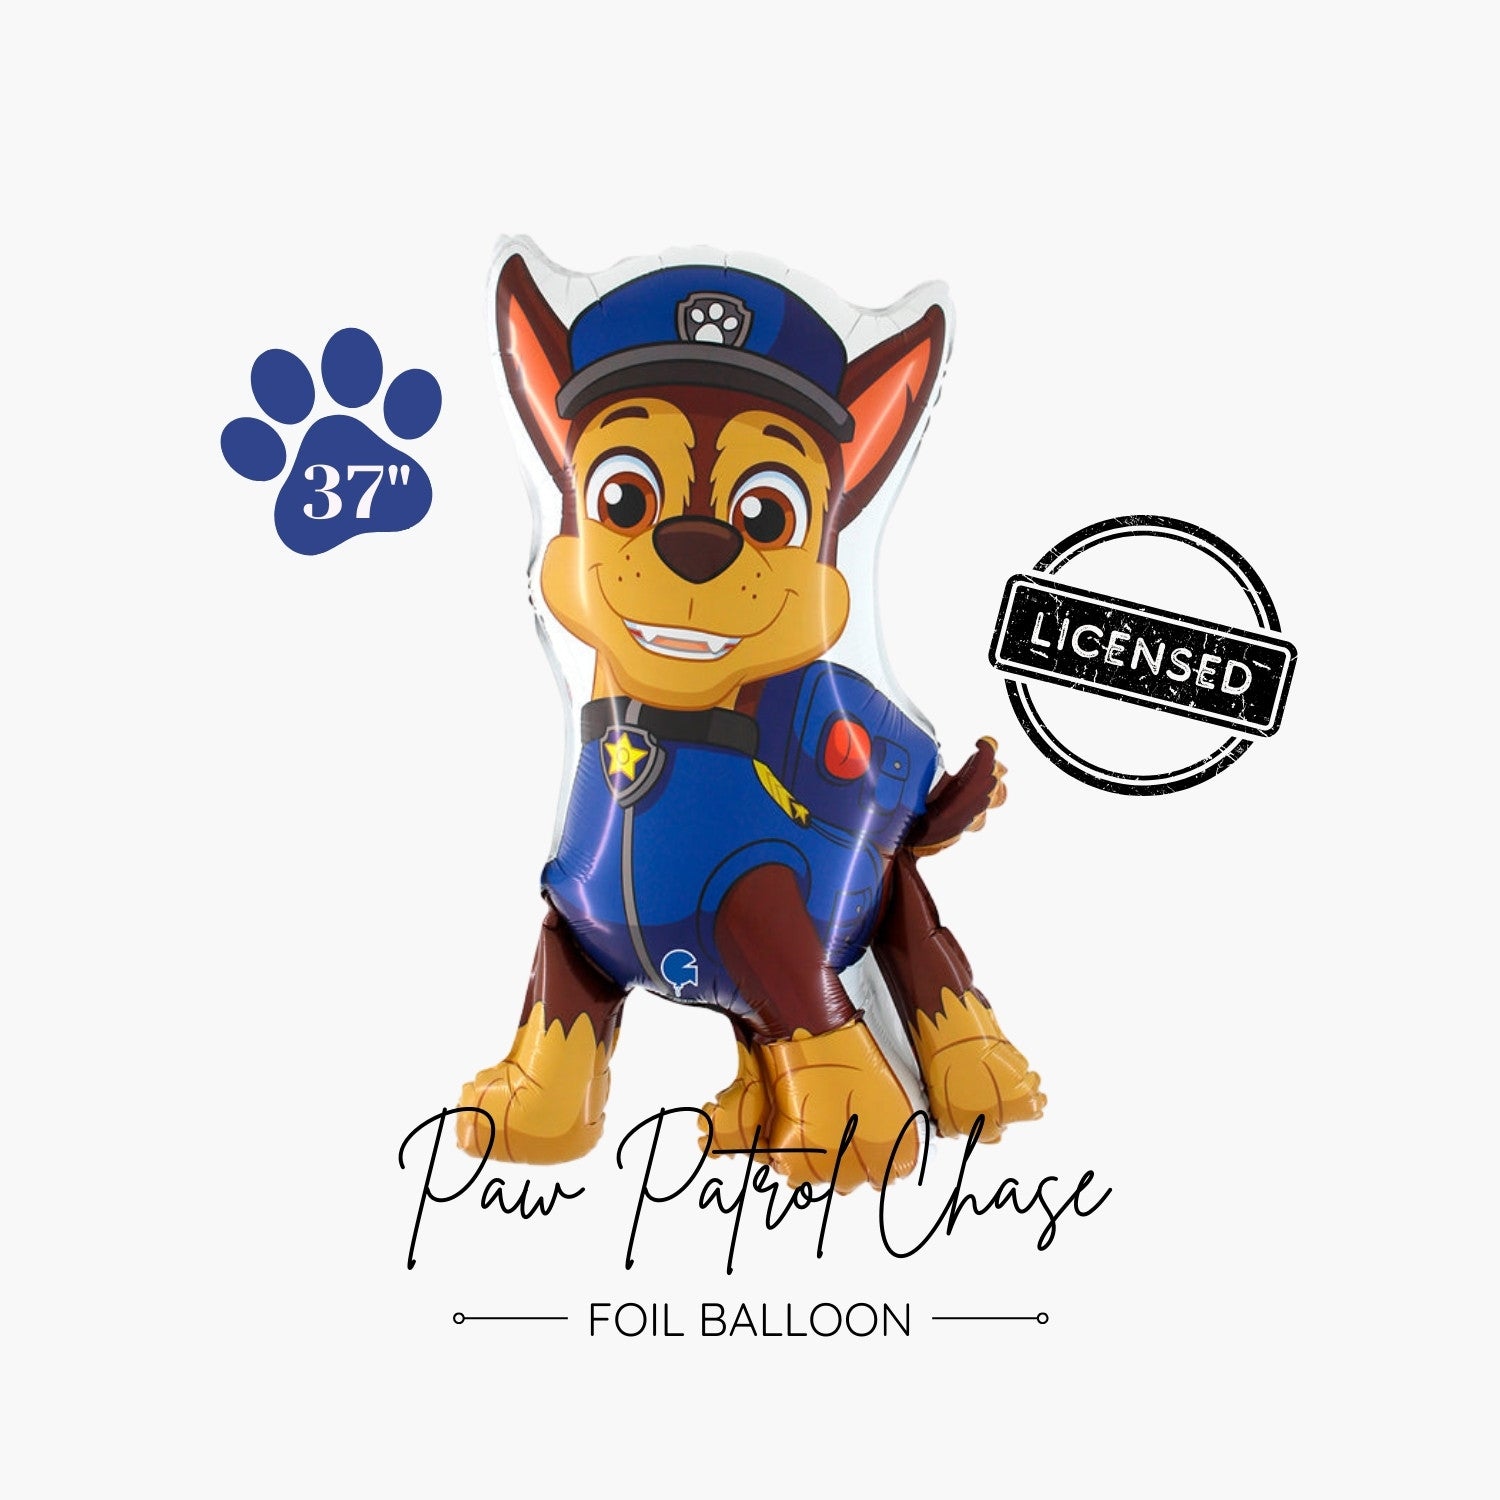 Licensed Paw Patrol Chase Foil Balloon 37" - Paw Patrol Kids Birthday Party Decorations